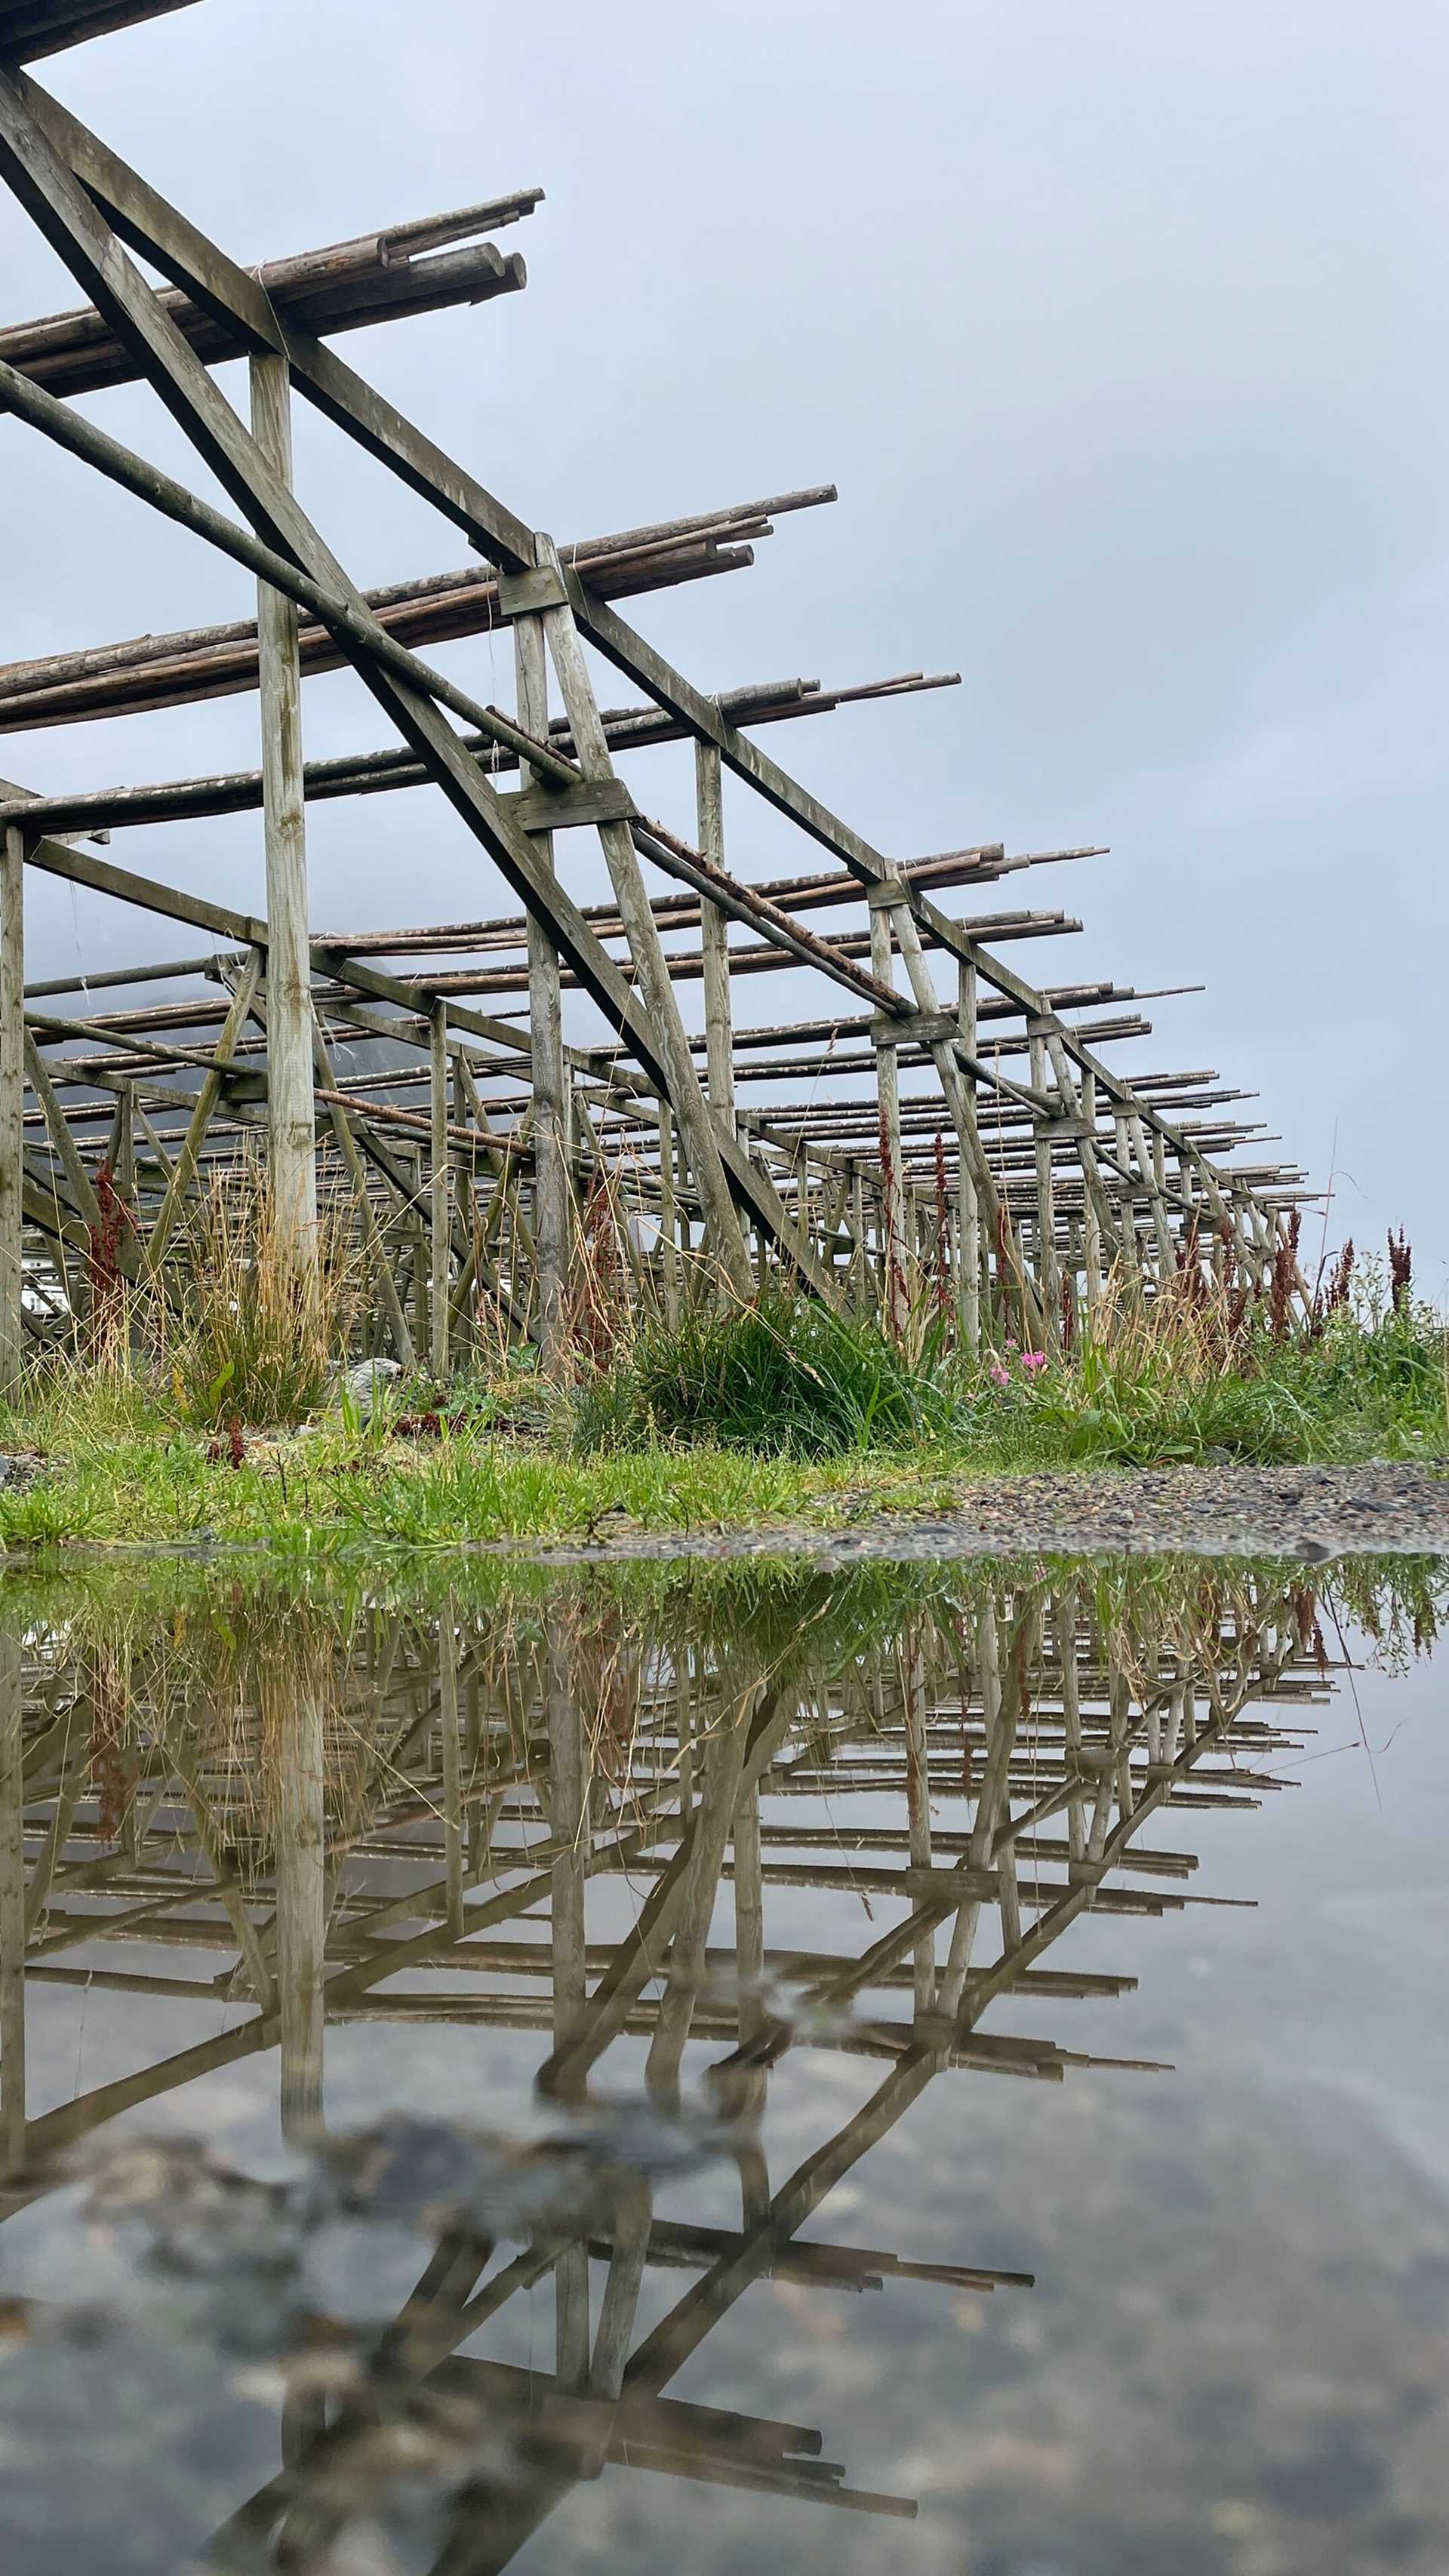 cod drying rack reflected in still water